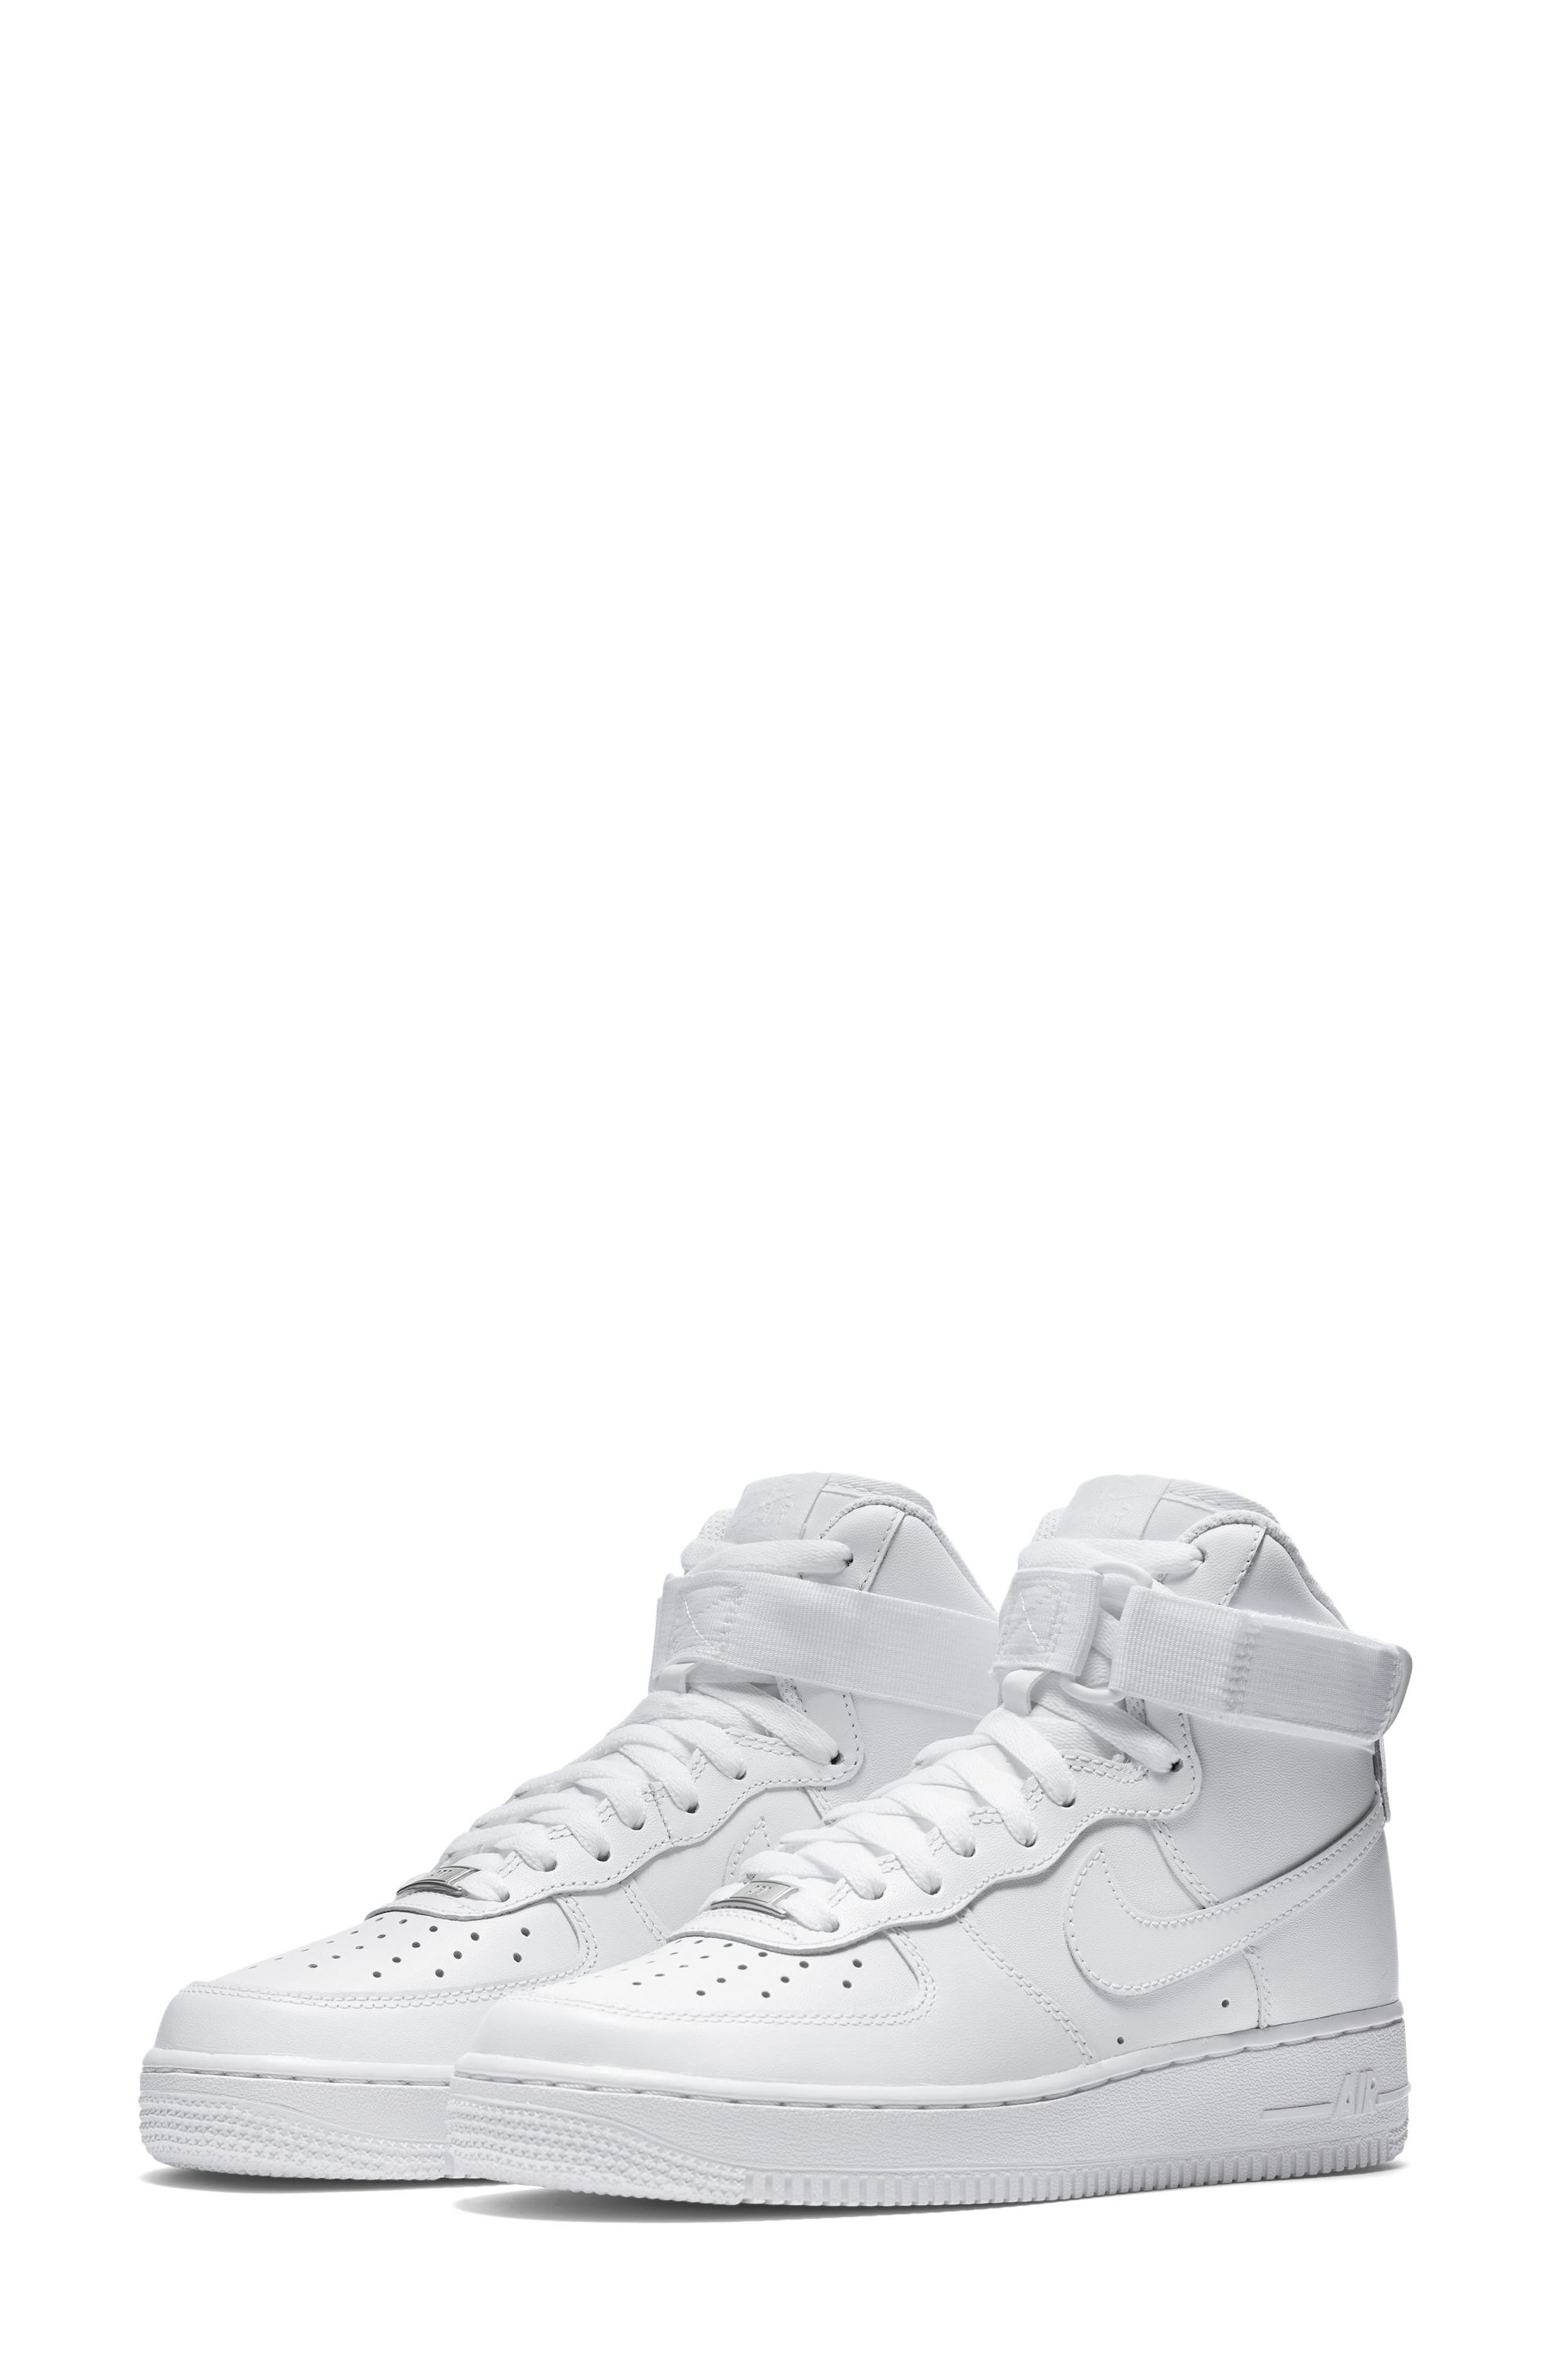 nike air force 1 white womens nordstrom